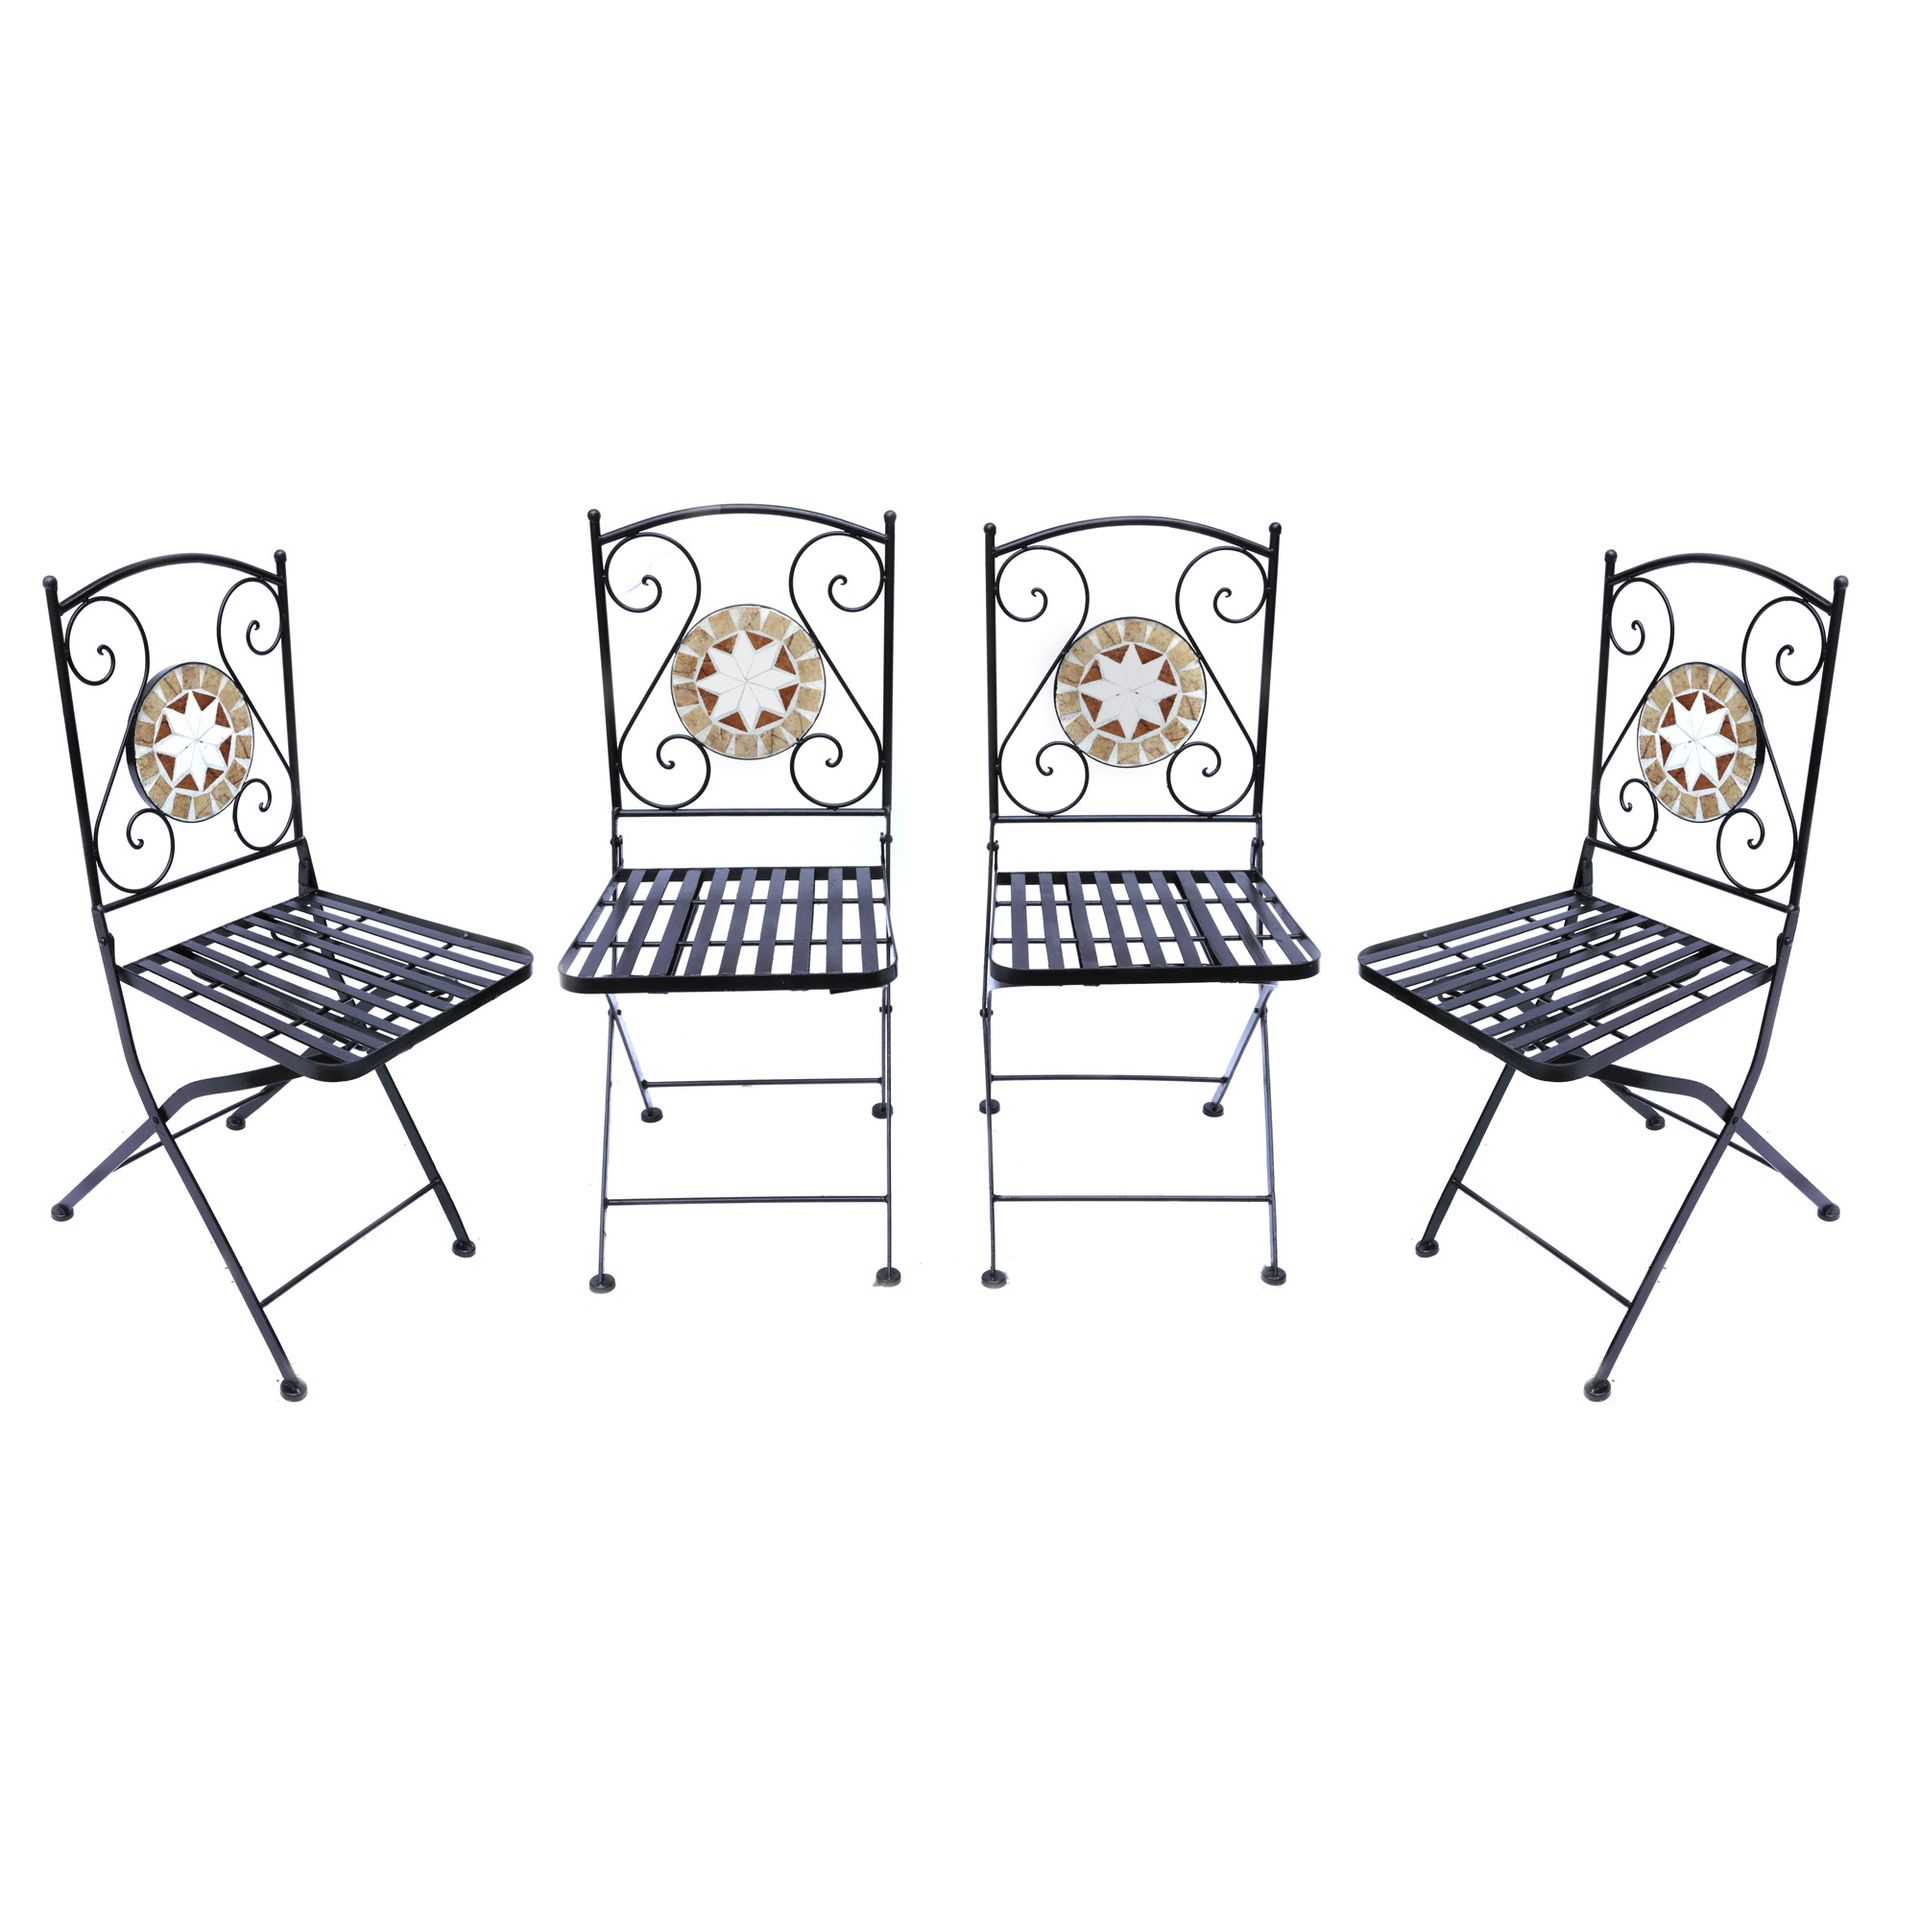 Four folding chairs for the terrace, decorated with multicoloured stone mosaic 金&hellip;